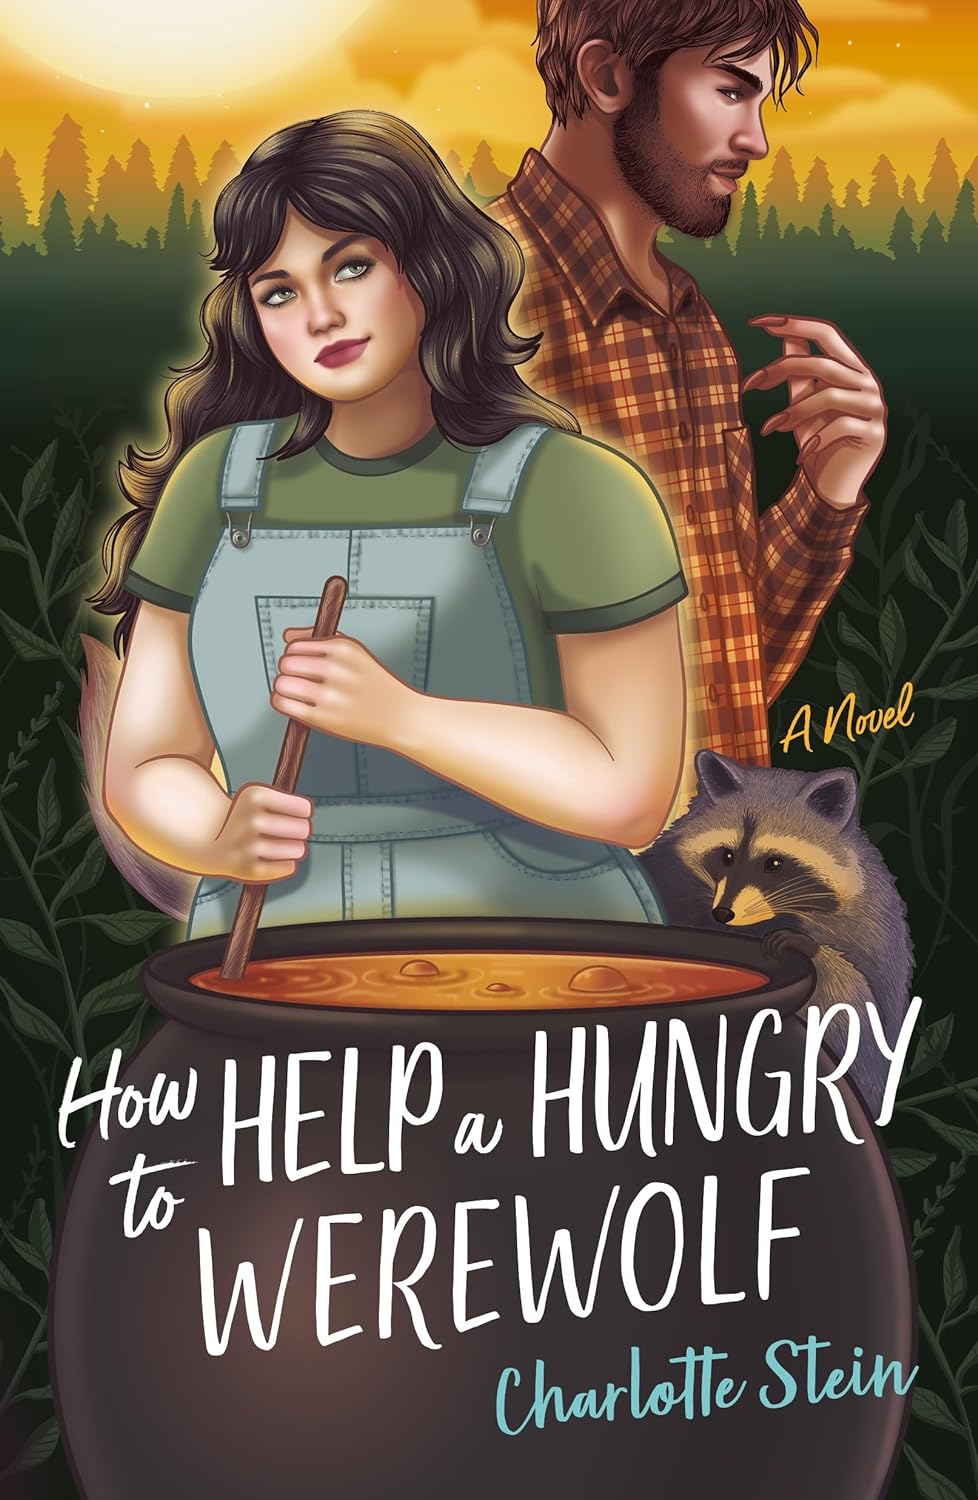 Book Rec & Review – How to Help a Hungry Werewolf by Charlotte Stein (ARC)